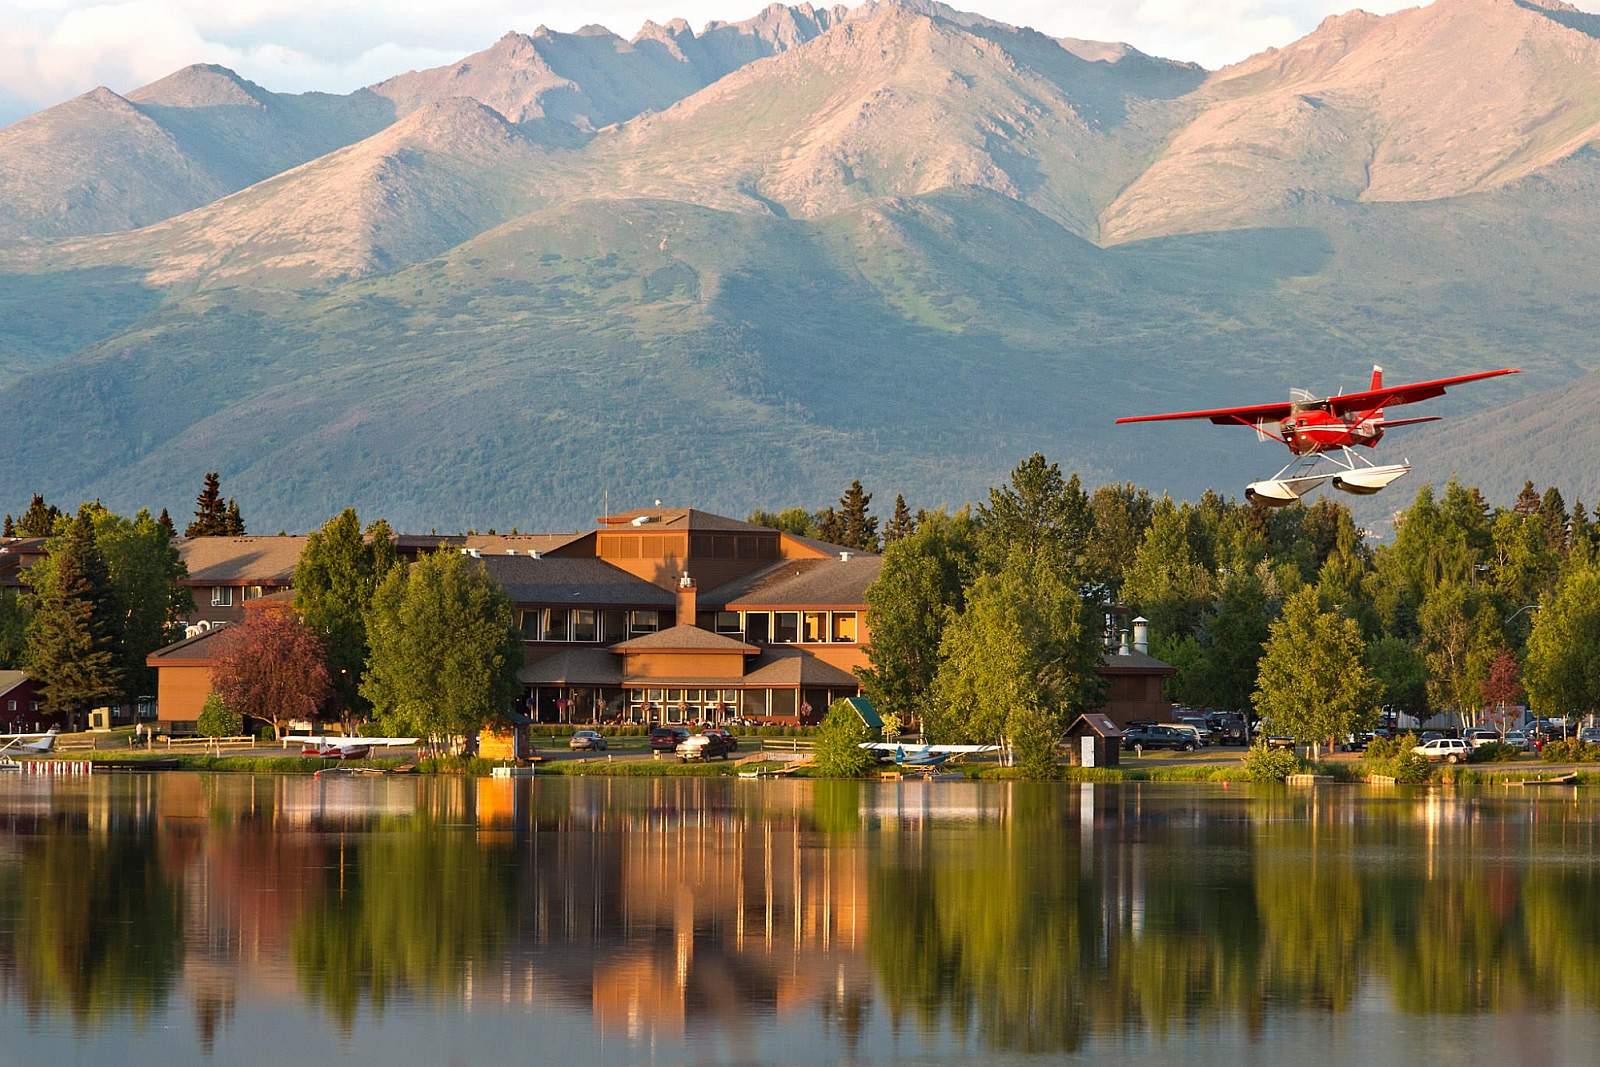 This lakefront hotel is a great wilderness stay in Alaska.
Pictured: Lakefront hotel in Alaska